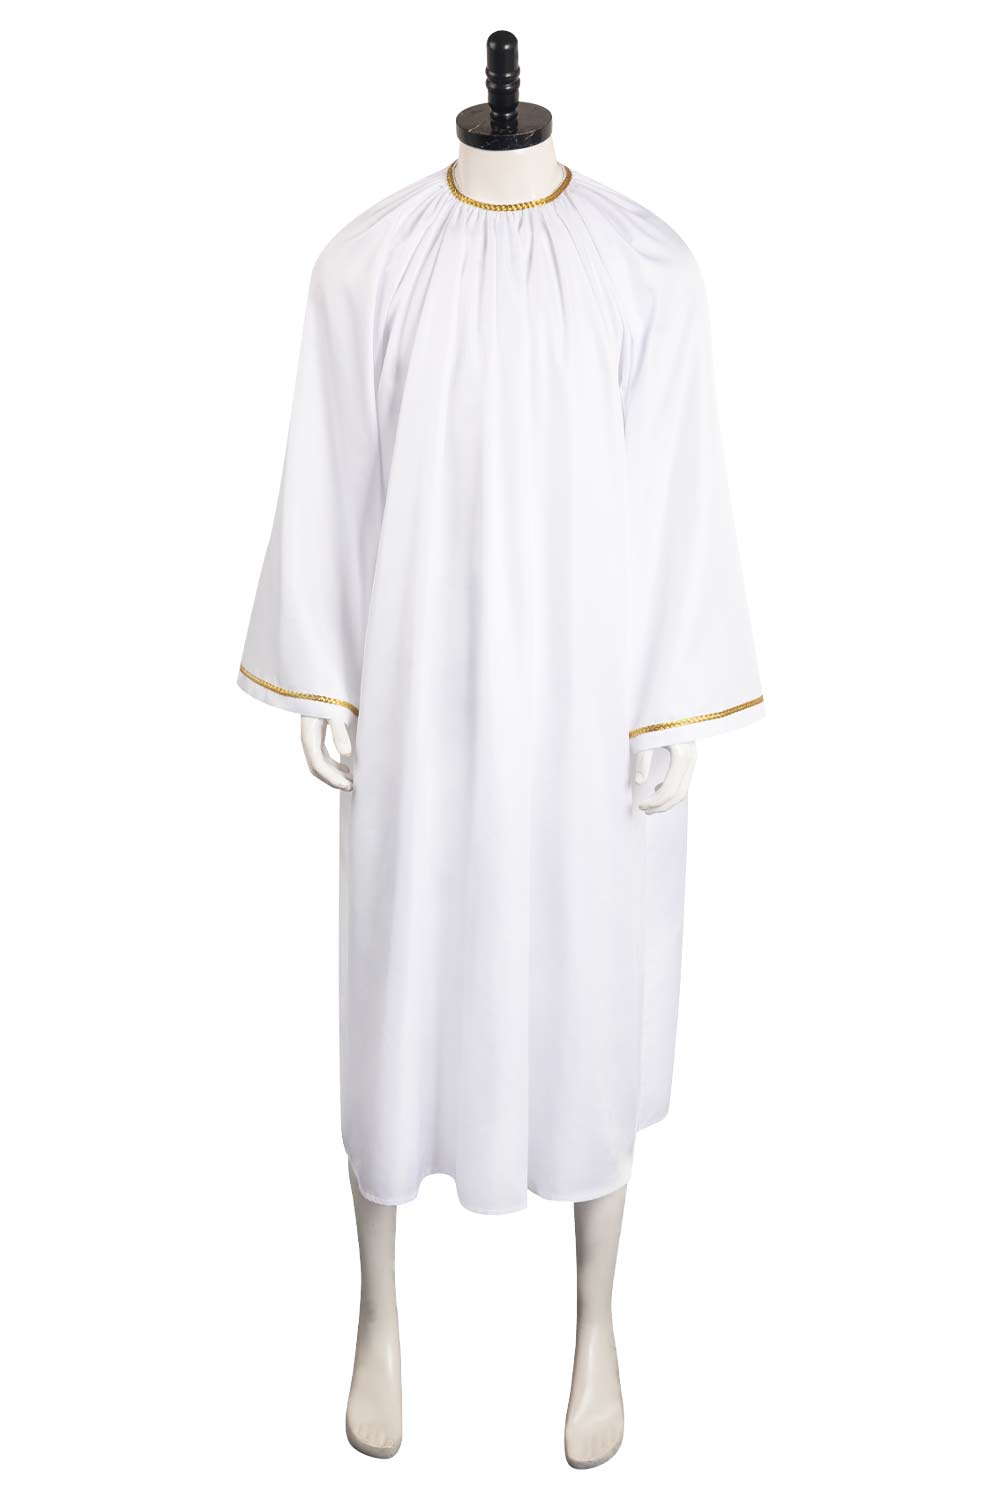 TV Good Omens Season 2 Aziraphale Crowly Angel Robe Outfits Halloween Carnival Suit Cosplay Costume